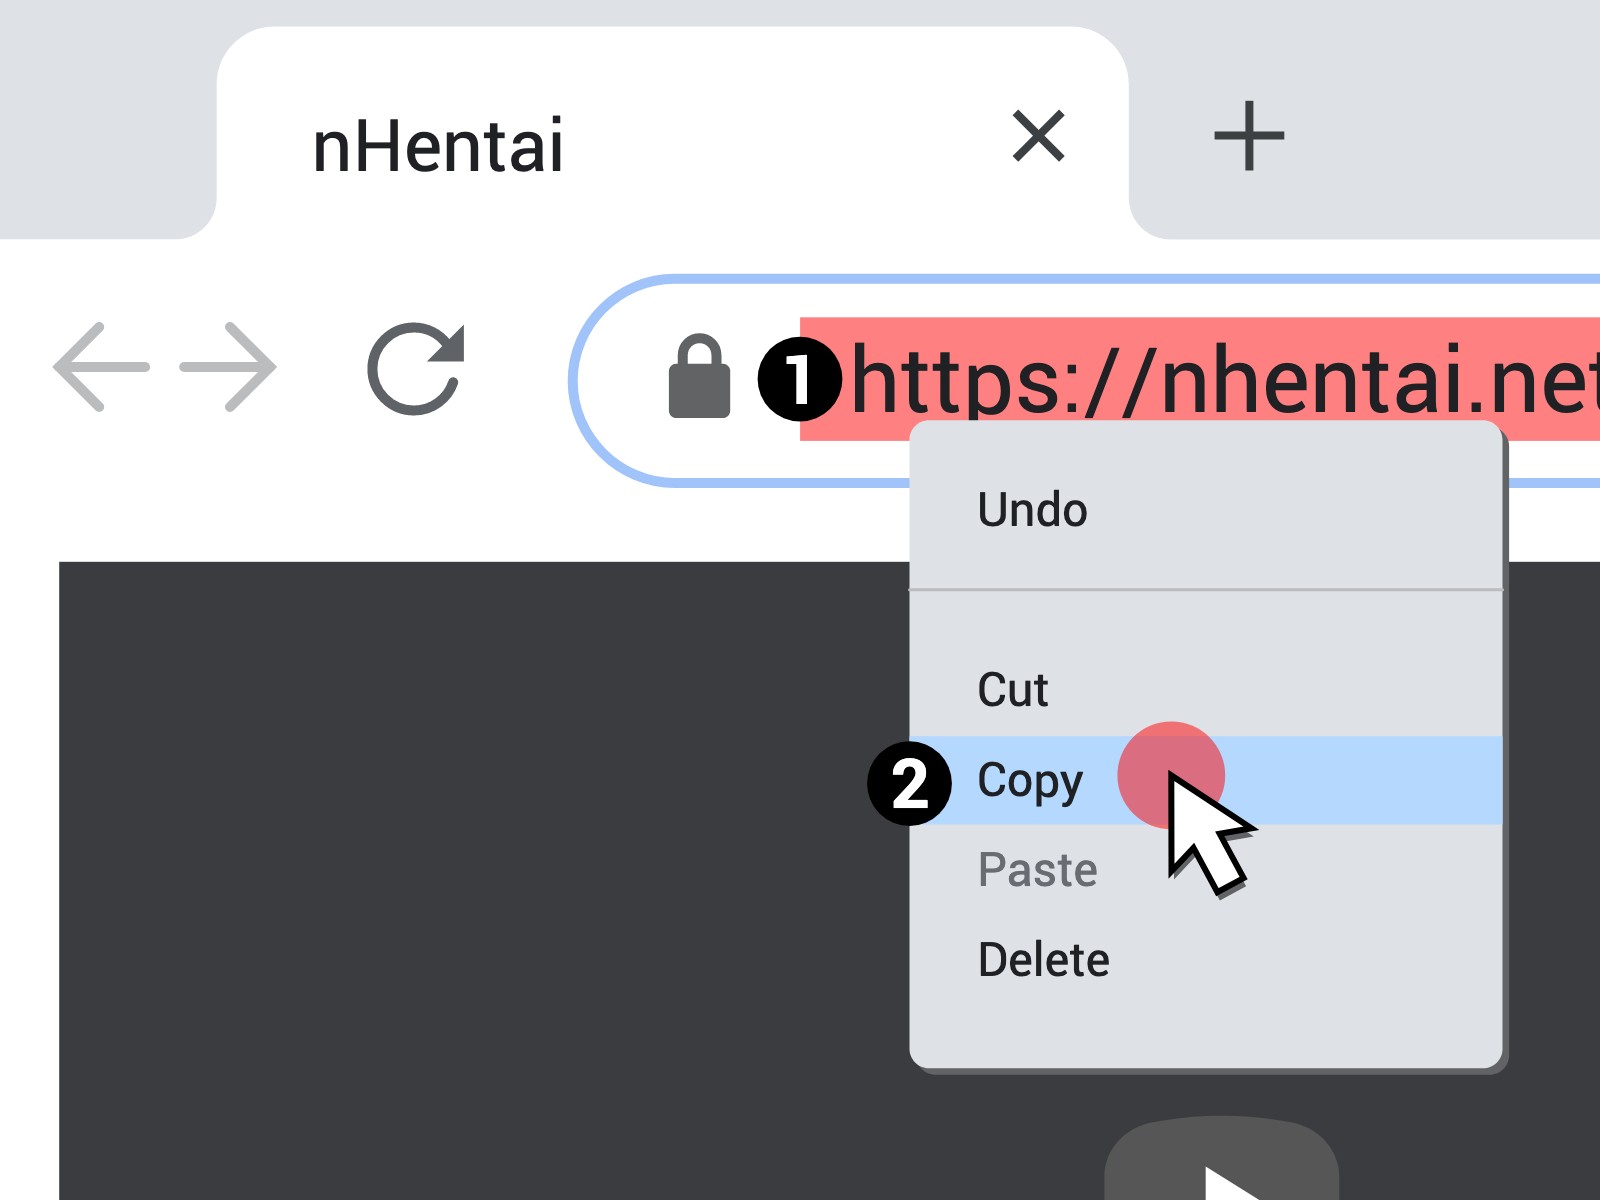 How to Download from nHentai